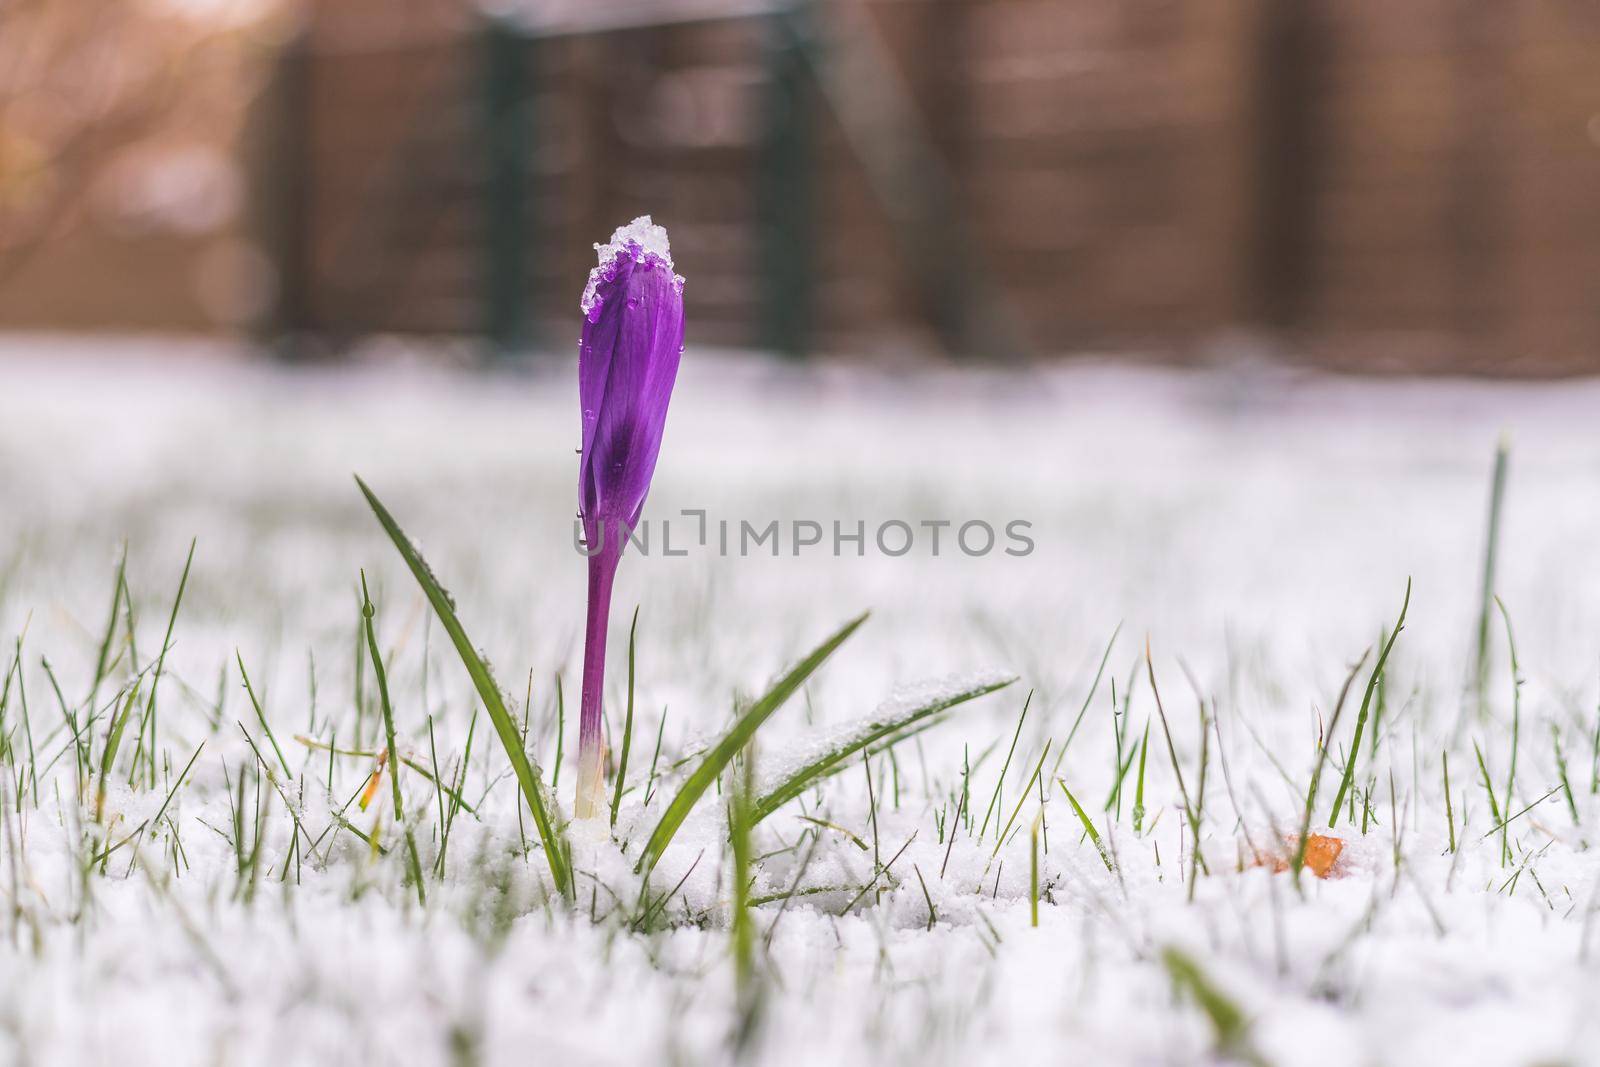 Snowy springtime in the front yard. Crocus spring flowers in the snow by Daxenbichler